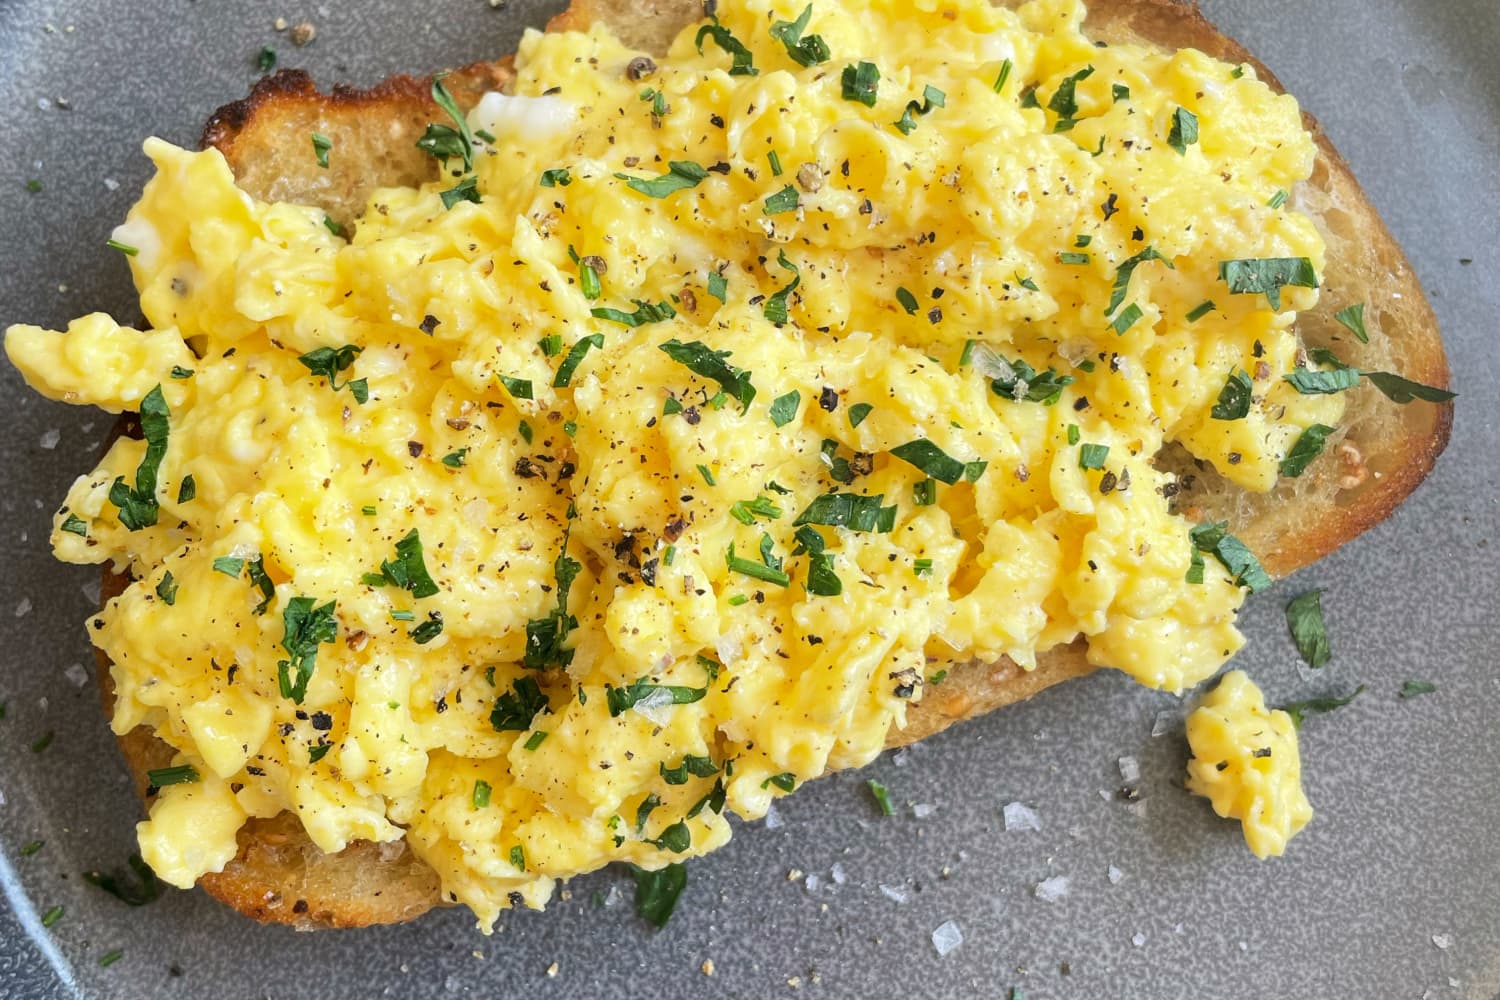 I Tried Mayoneggs and They’re My New Favorite Scrambled Eggs